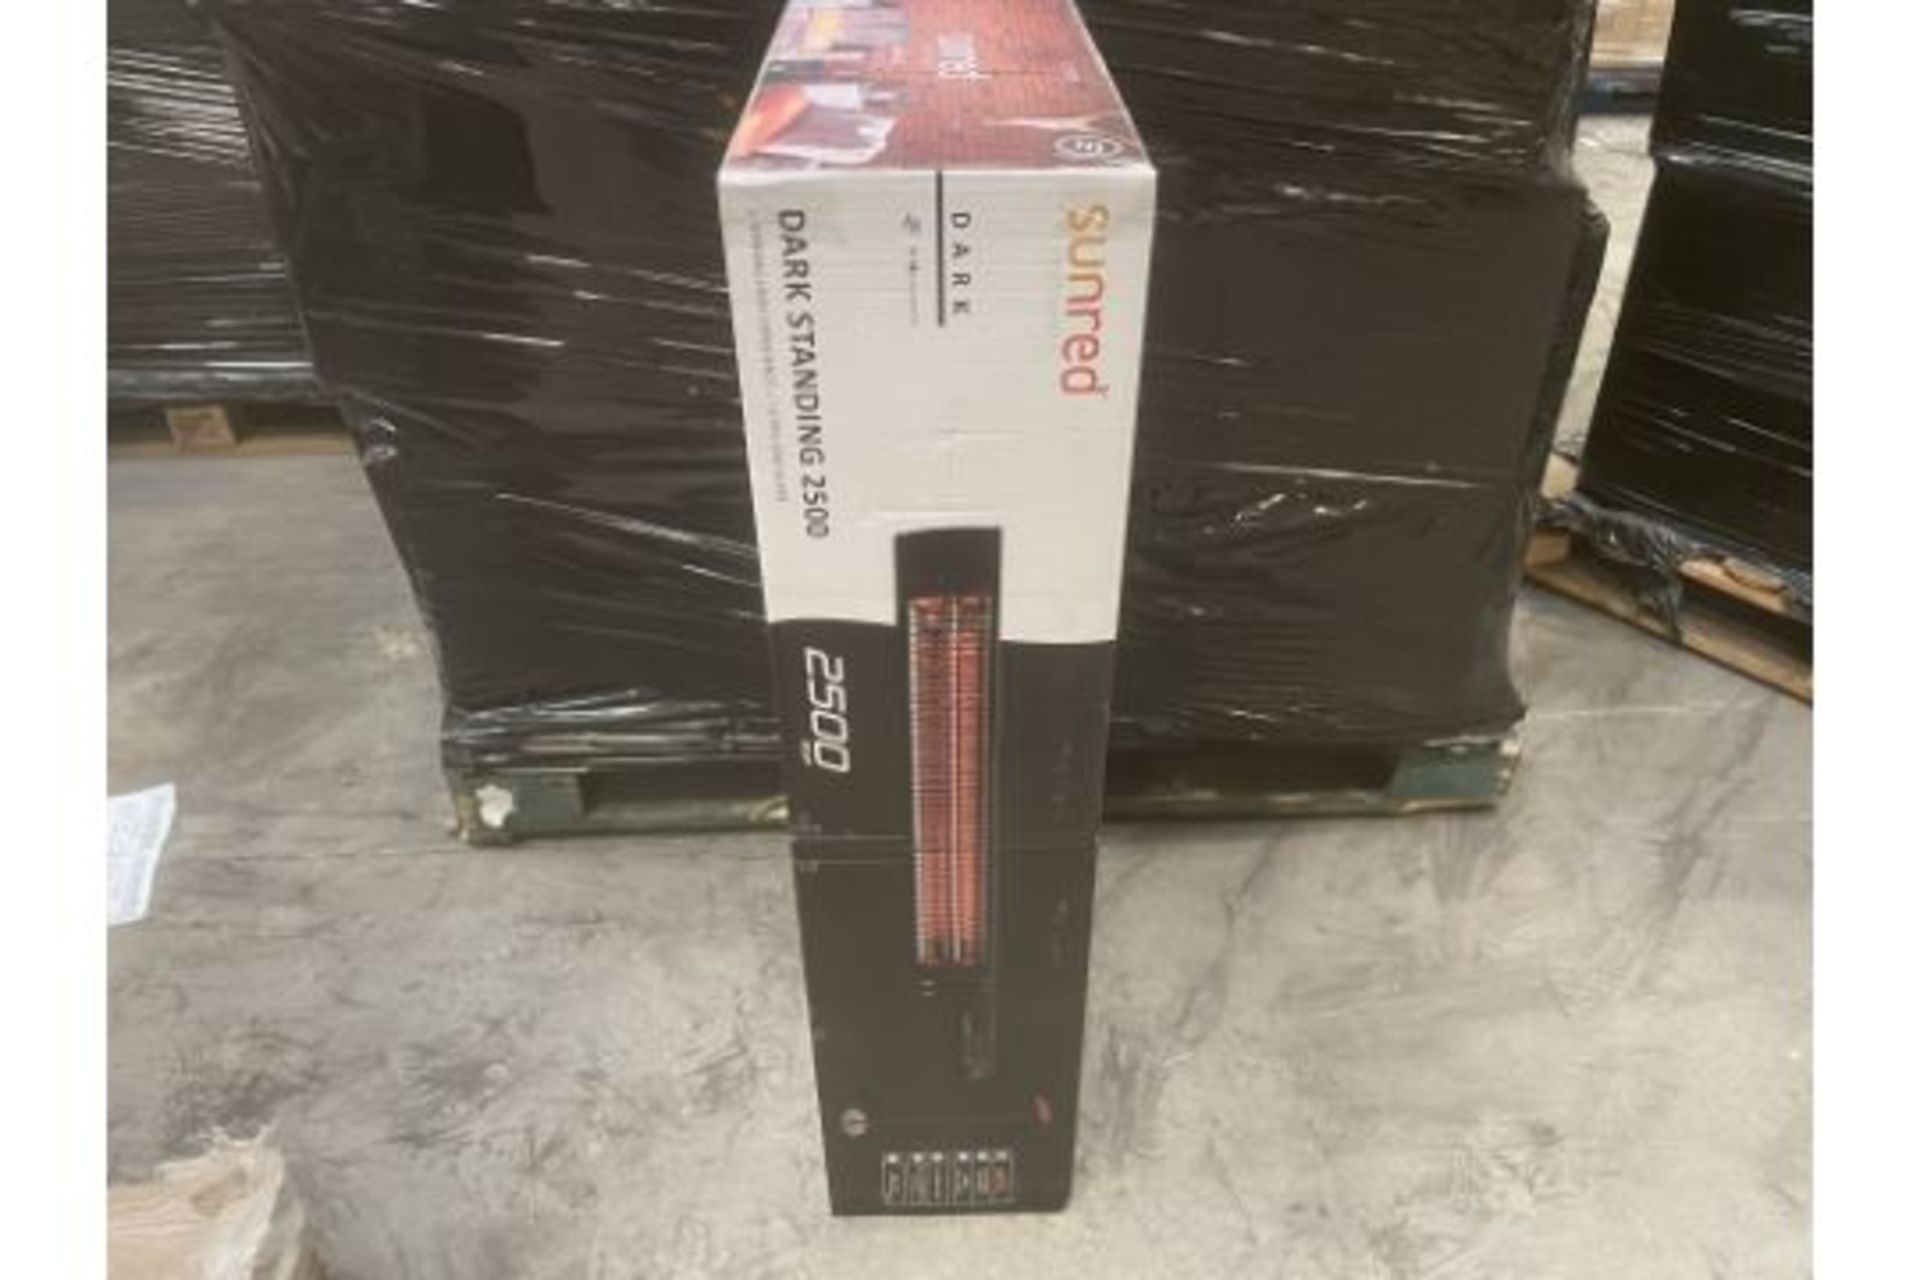 4 x Brand New The Sunred Heater Dark Standing 2500W RRP £399. A high quality and efficient outdoor